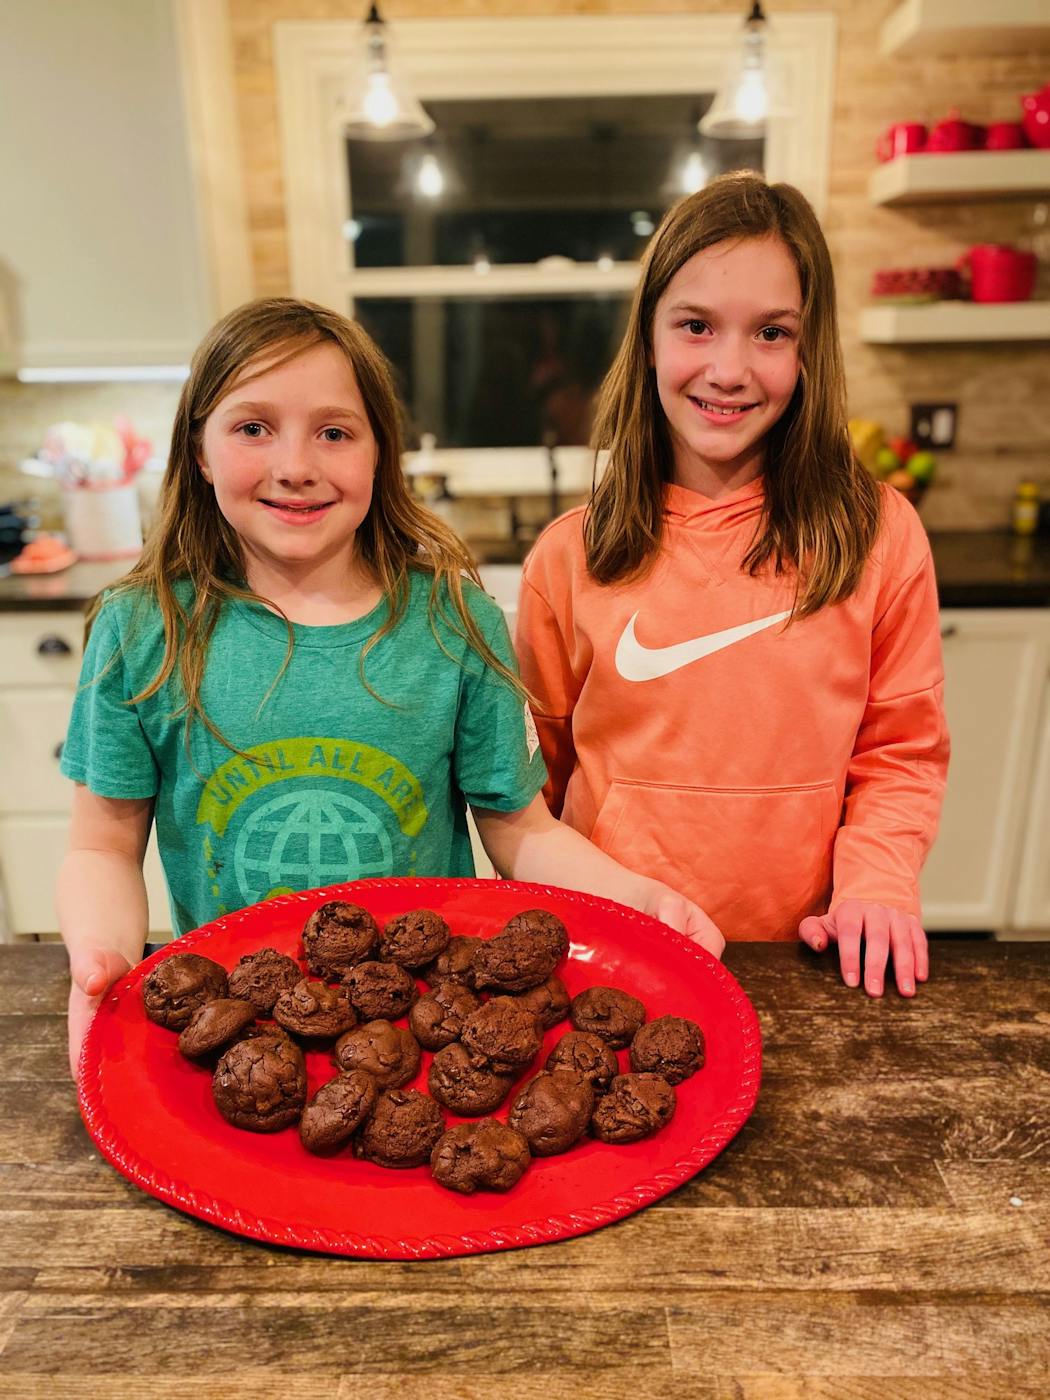 MaryKate, 10, and Kristiana, 11, from Arden Hills, show off their chocolate brownie cookies.